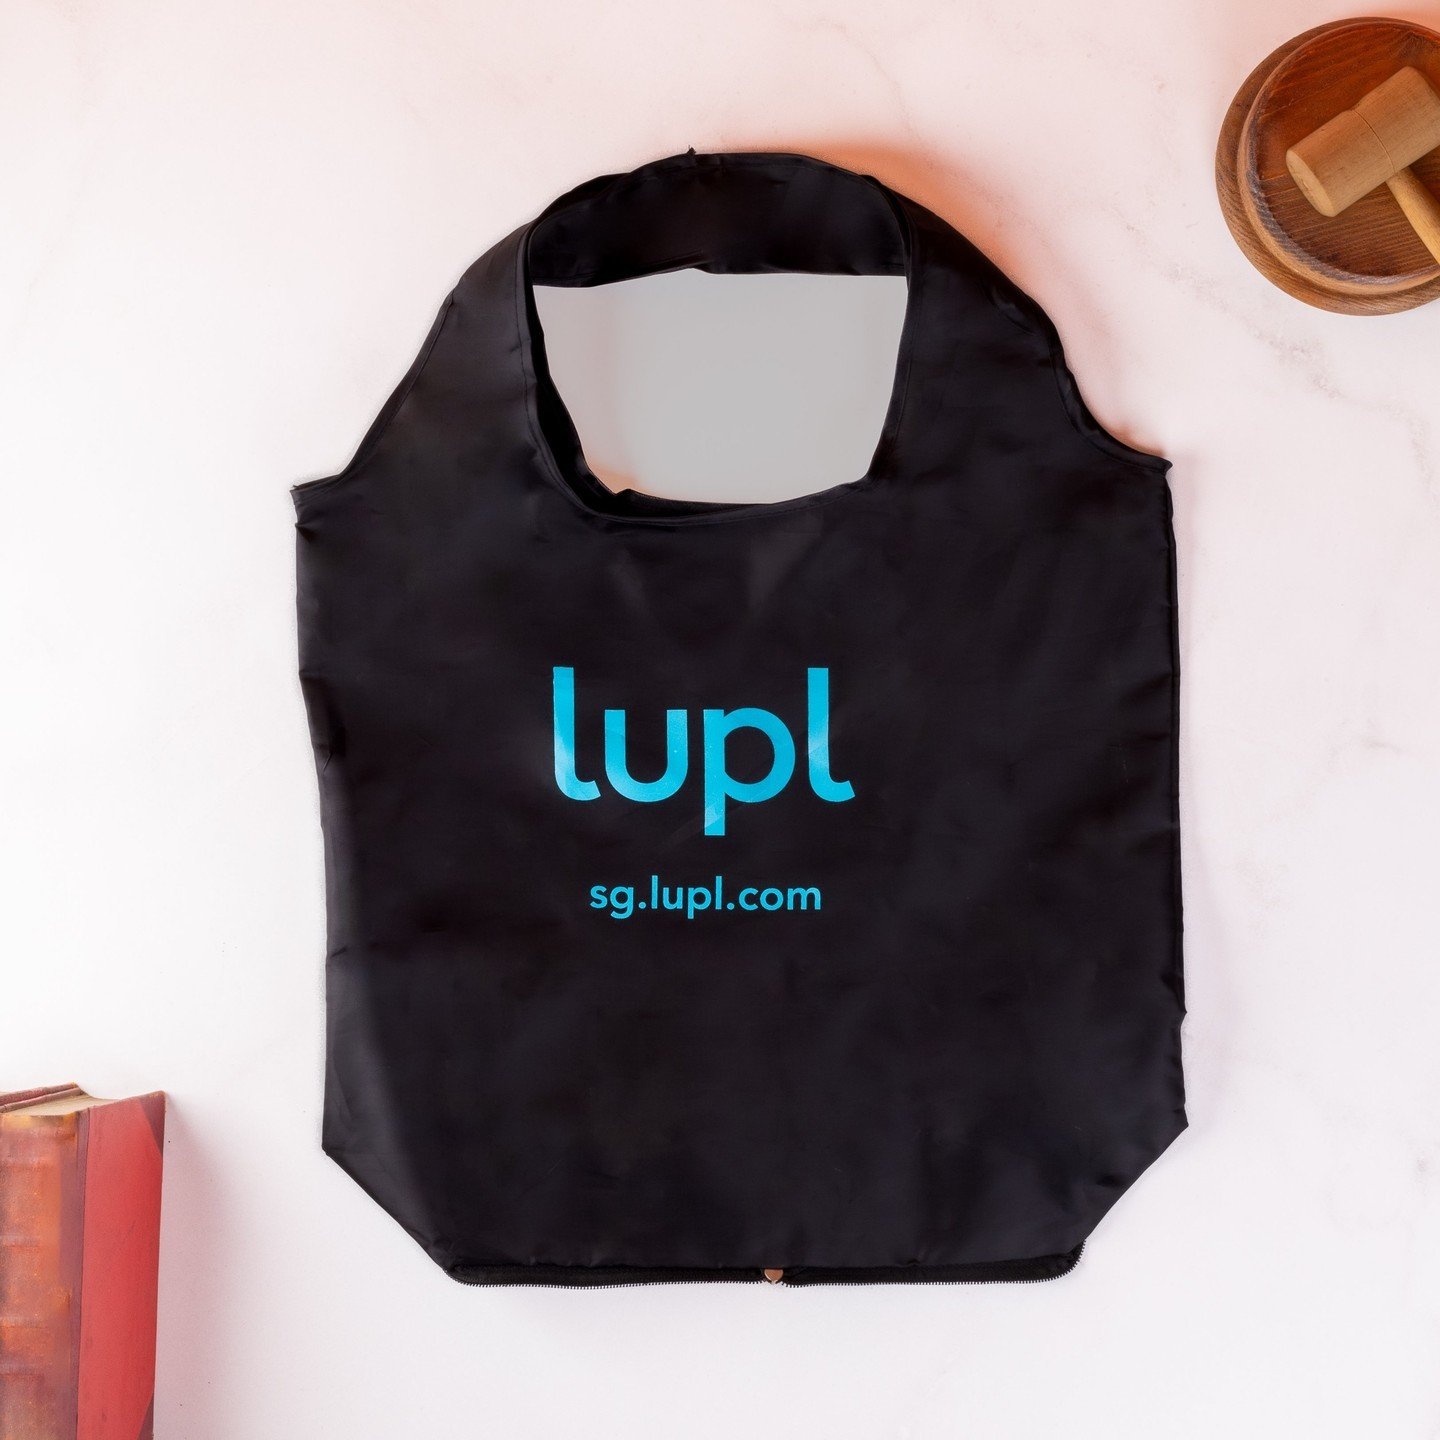 Custom made foldable reusable bag for LUPL - an emblem of corporate charisma! Make waves and flaunt your brands commitment to excellence in style. Ready to ignite your brand's allure?. Get a quote today!

 #CustomFoldableBag #ReusableBags #LUPL #Corp